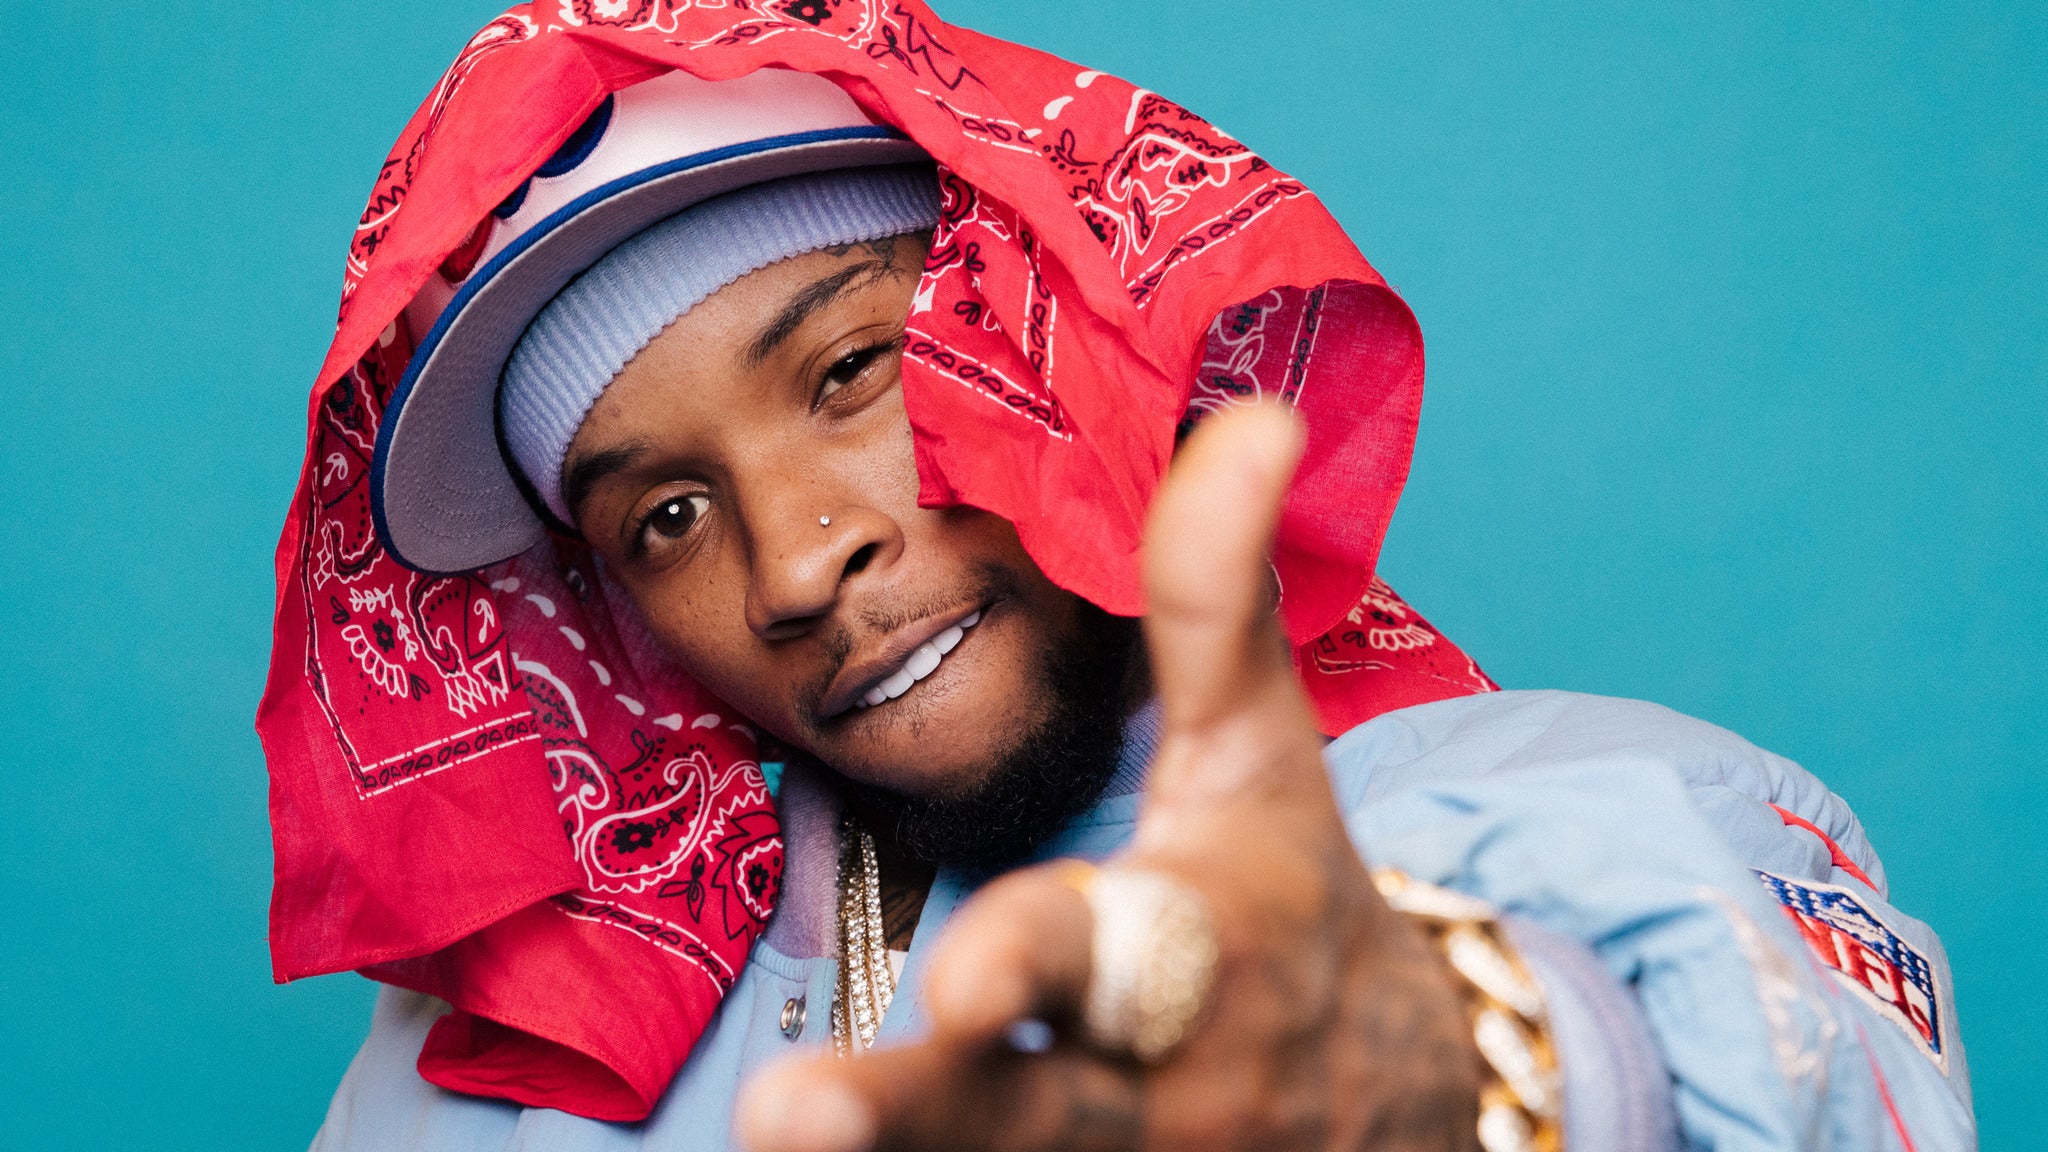 Tory Lanez: Memories Don't Die Tour in Wallingford promo photo for Spotify presale offer code